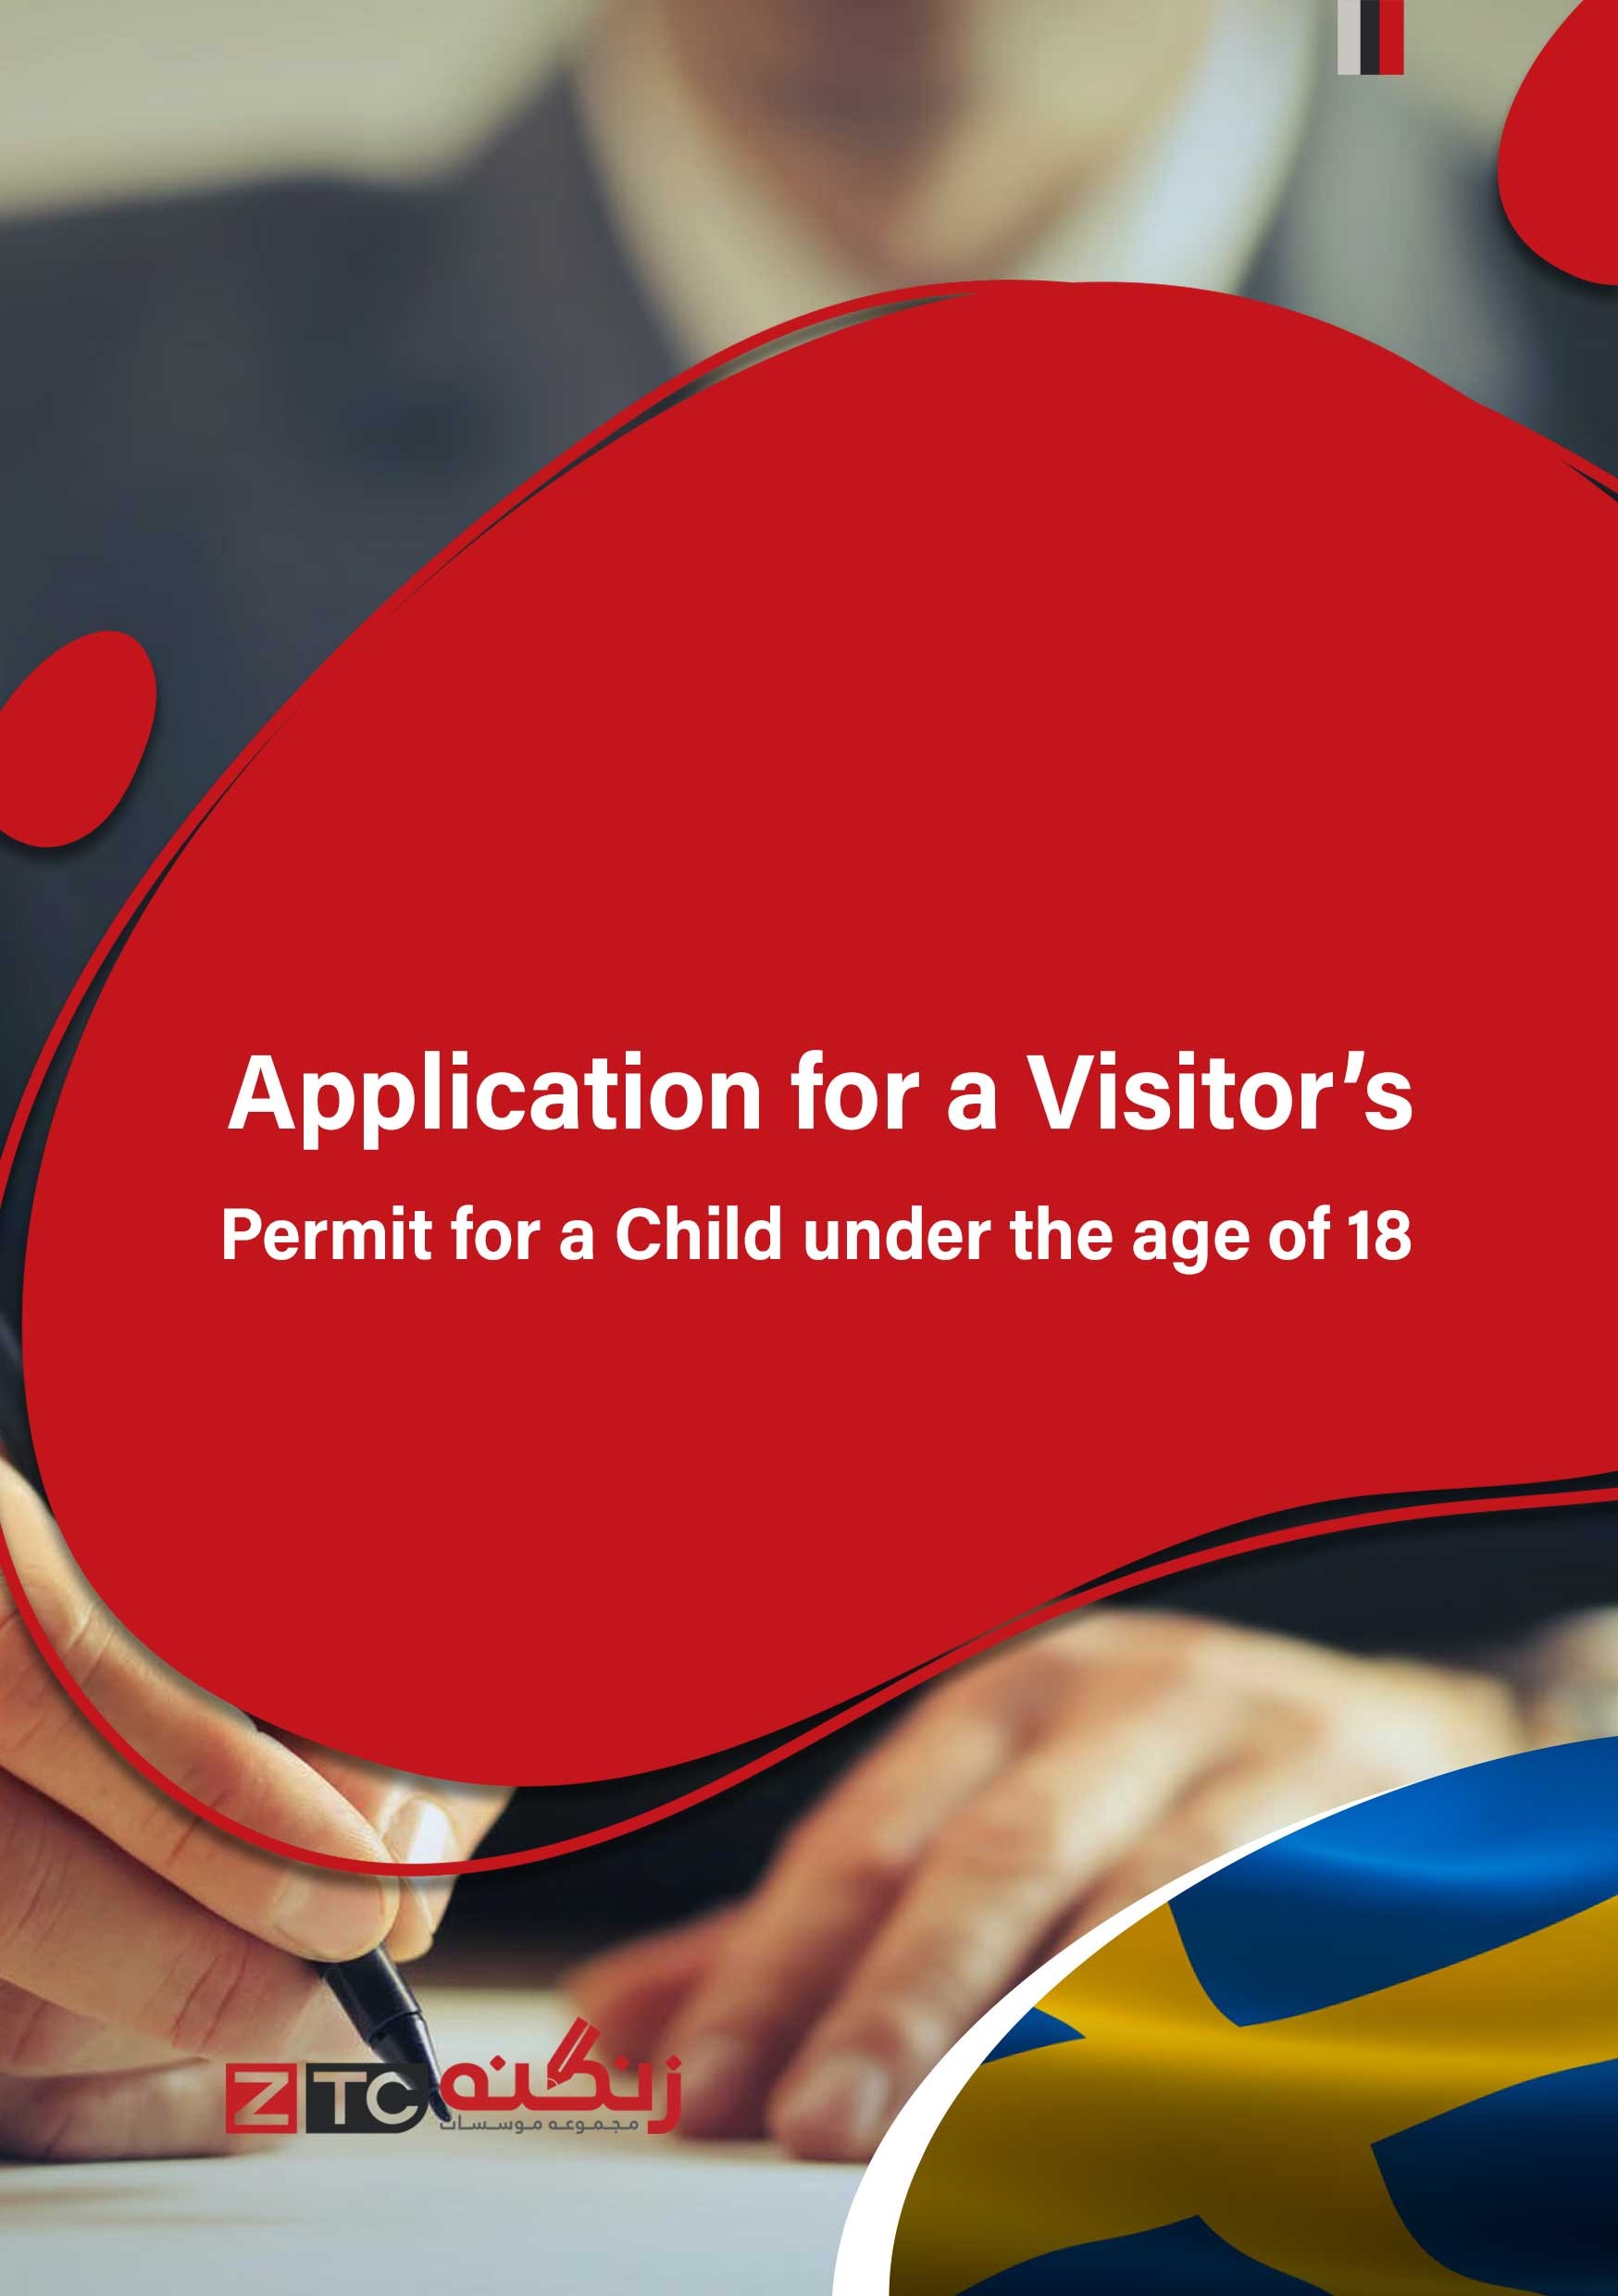 Application for a Visitor’s Permit for a Child under the age of 18